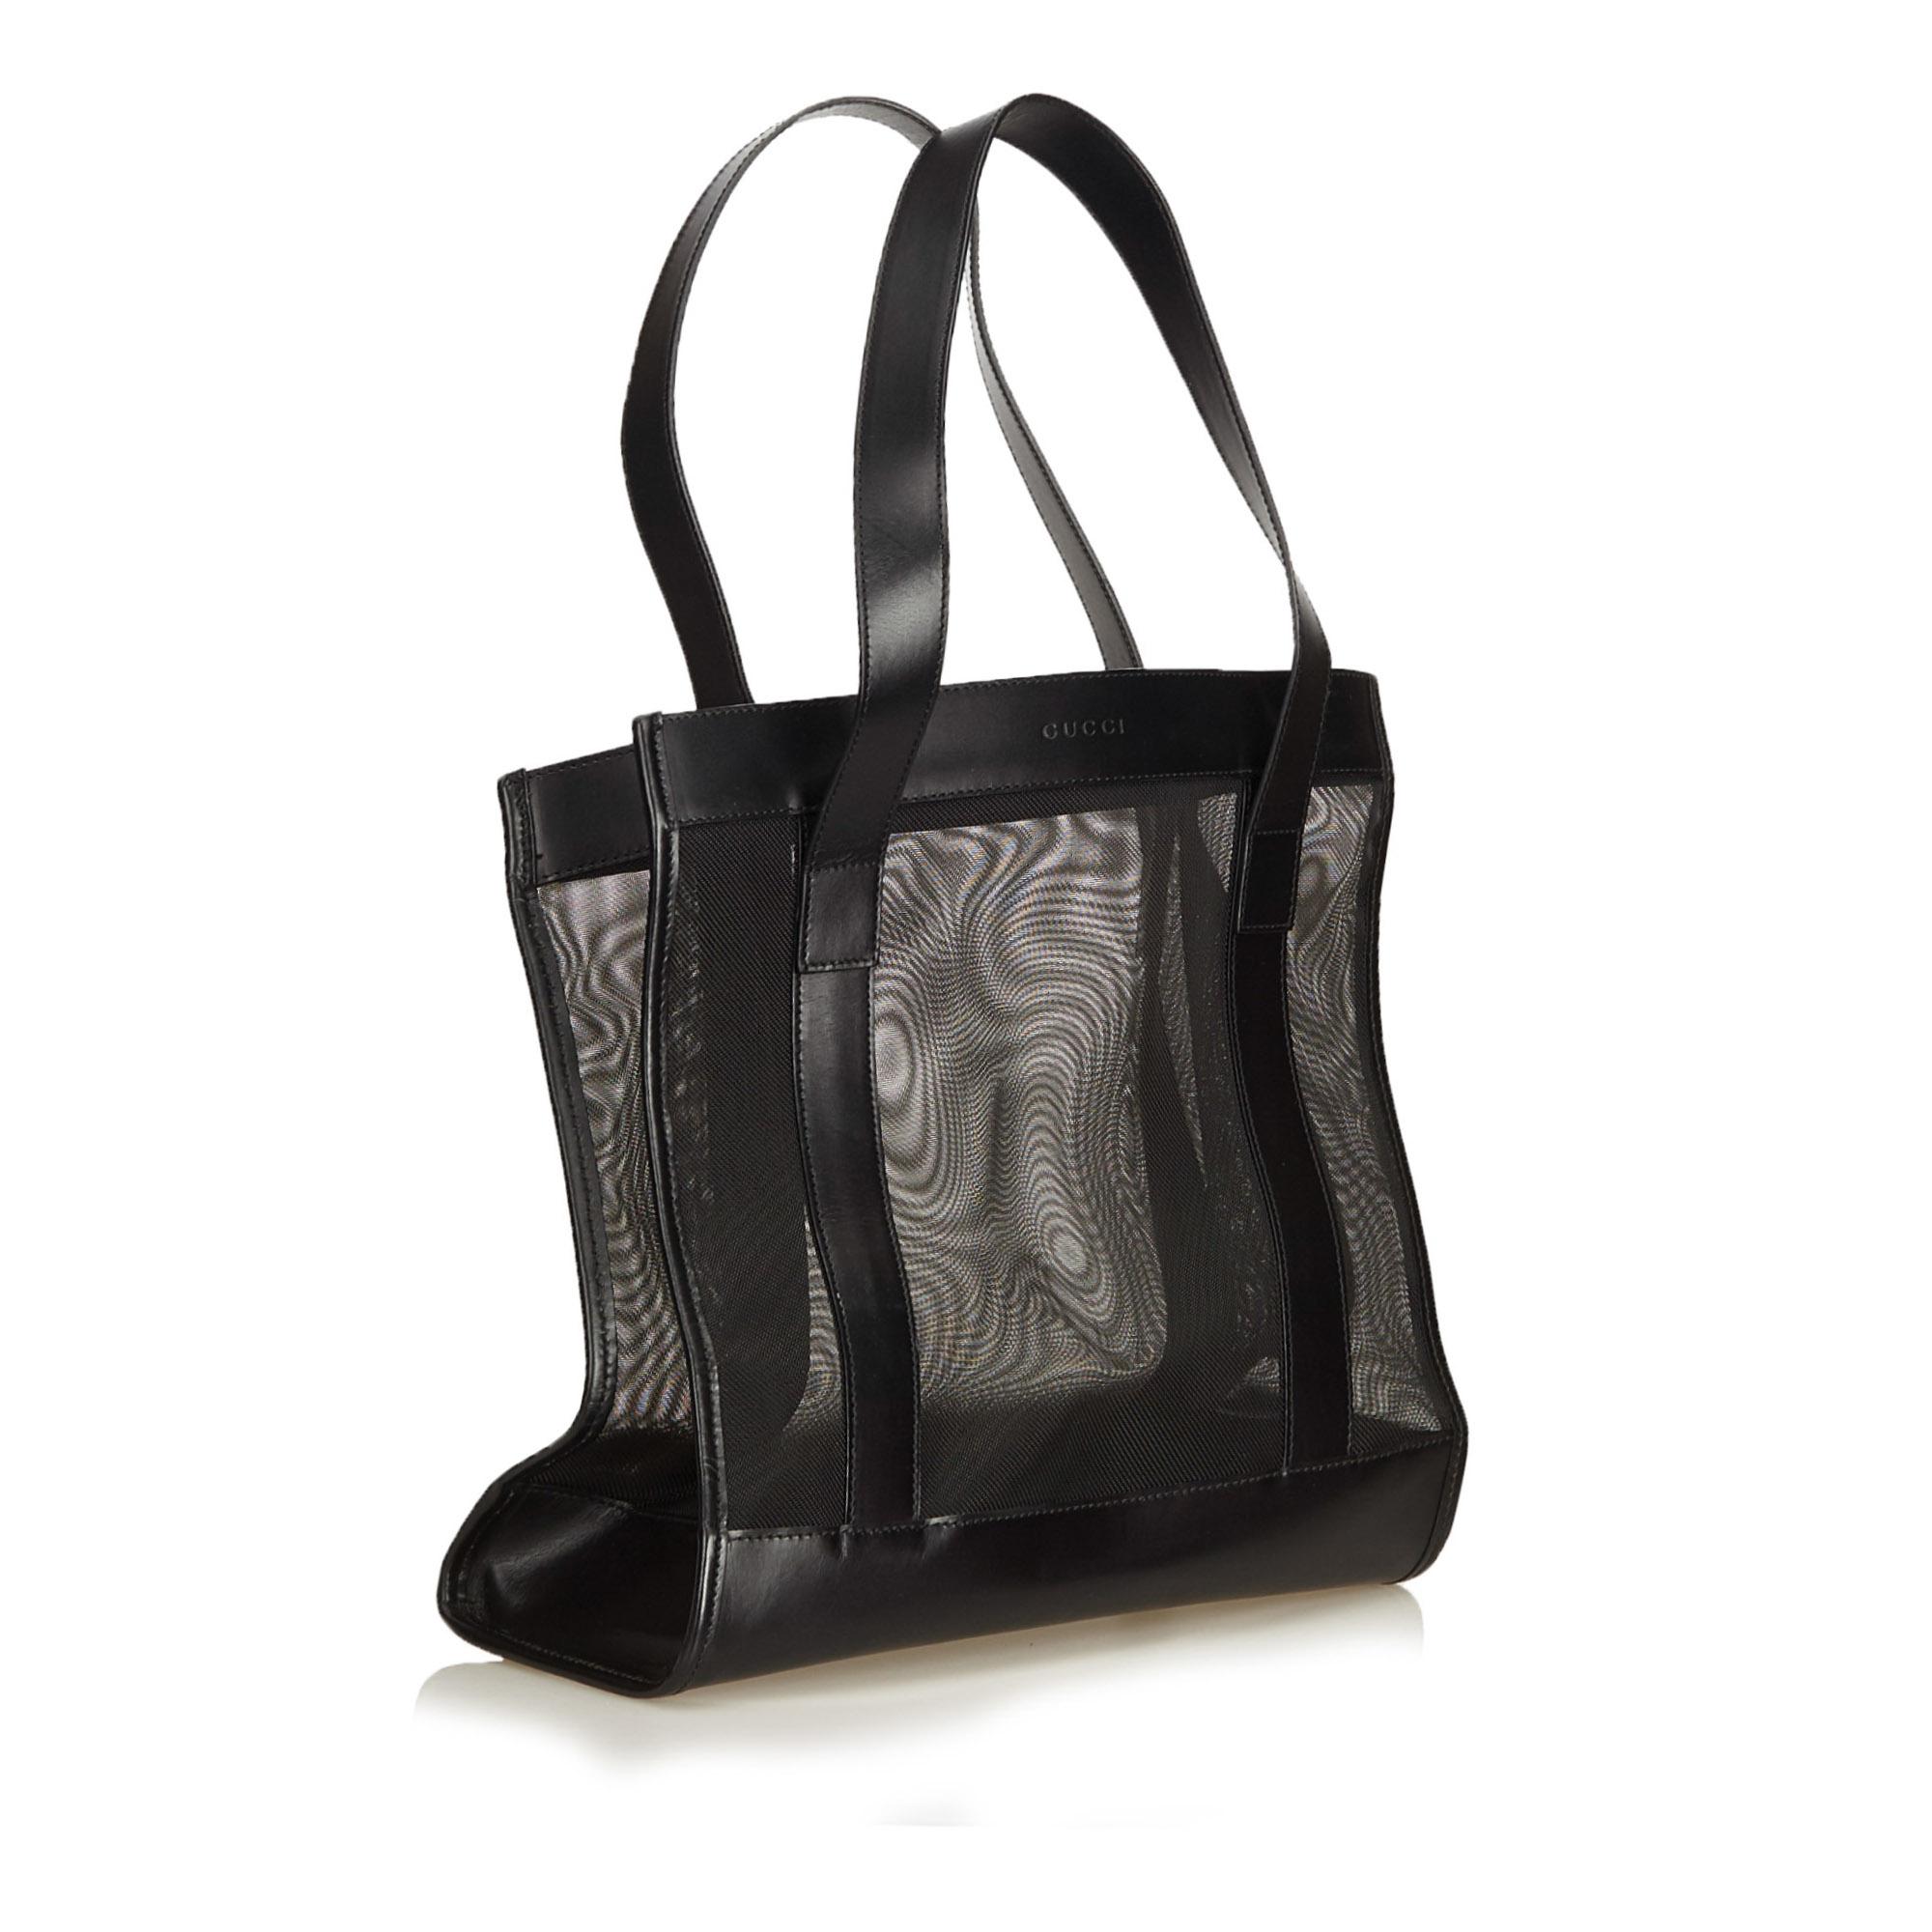 This tote bag features a mesh body, flat leather straps, and an open top. It carries as AB condition rating.

Inclusions: 
This item does not come with inclusions.

Dimensions:
Length: 27.00 cm
Width: 26.00 cm
Depth: 12.00 cm
Shoulder Drop: 19.00